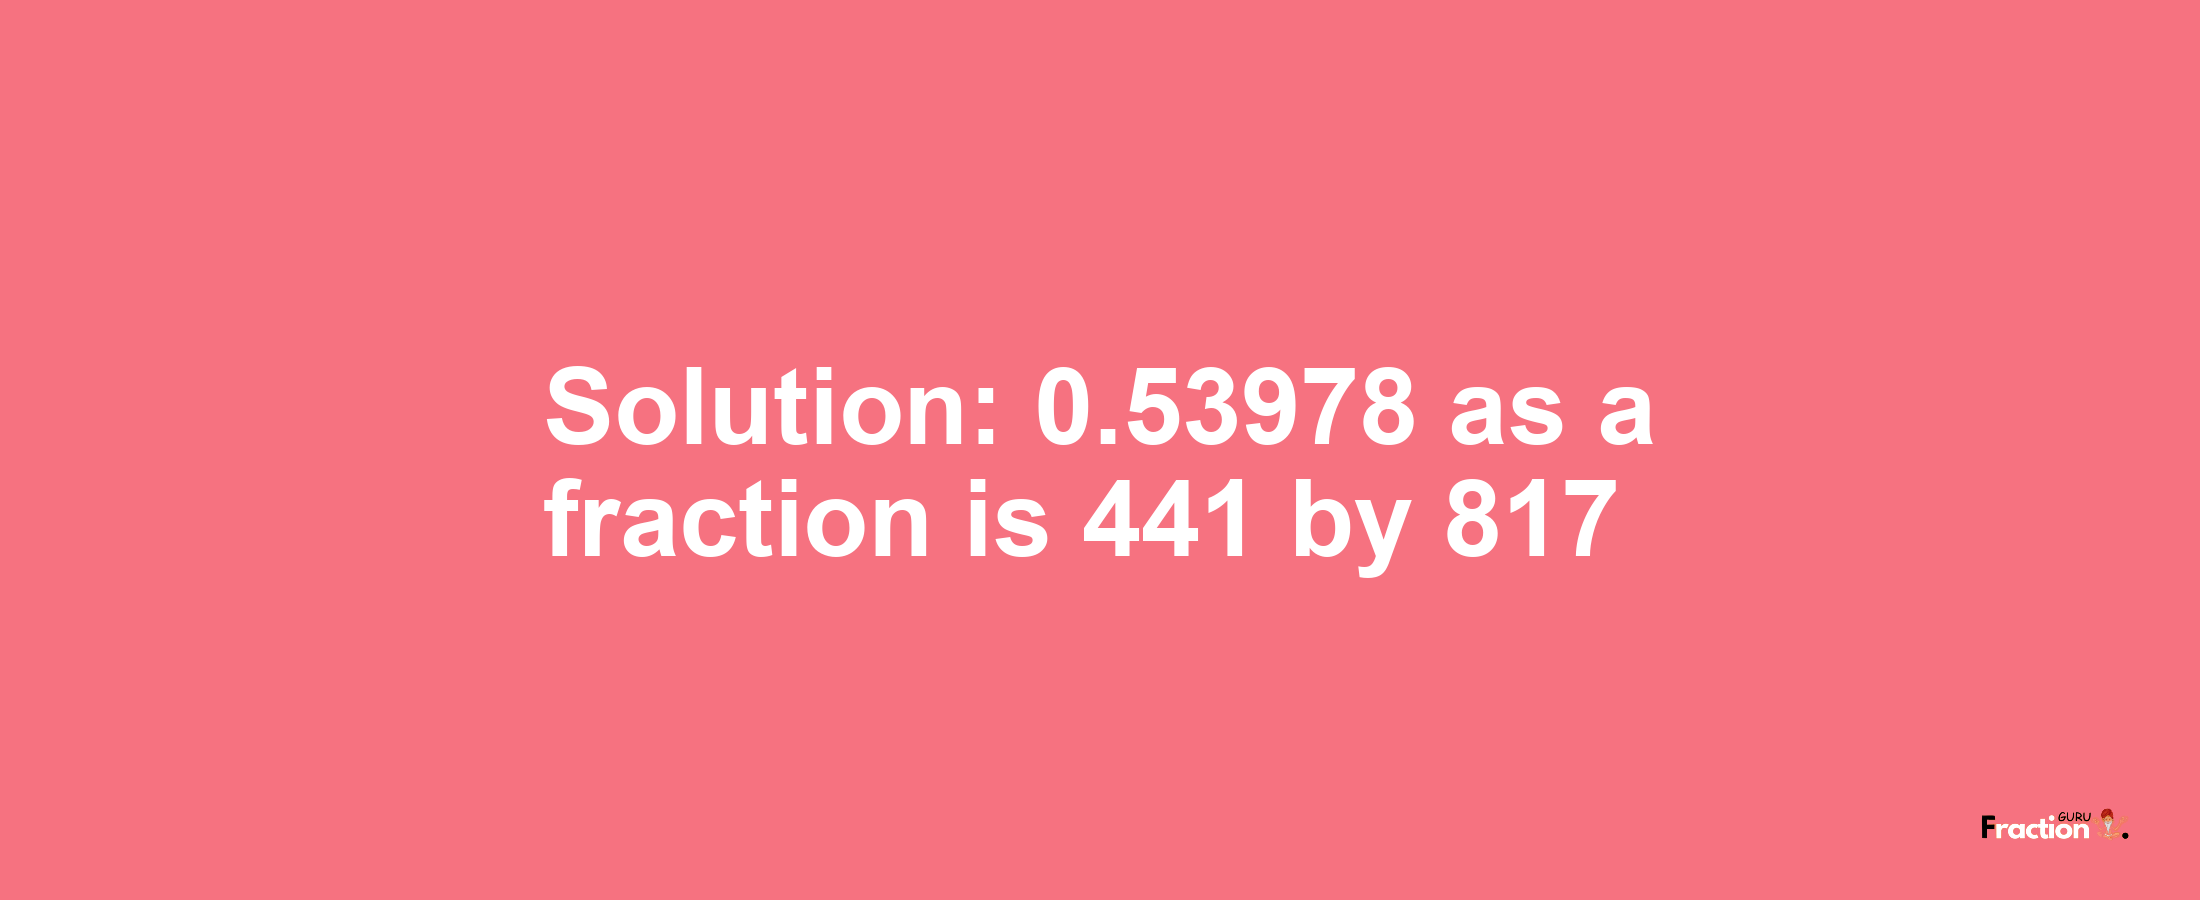 Solution:0.53978 as a fraction is 441/817